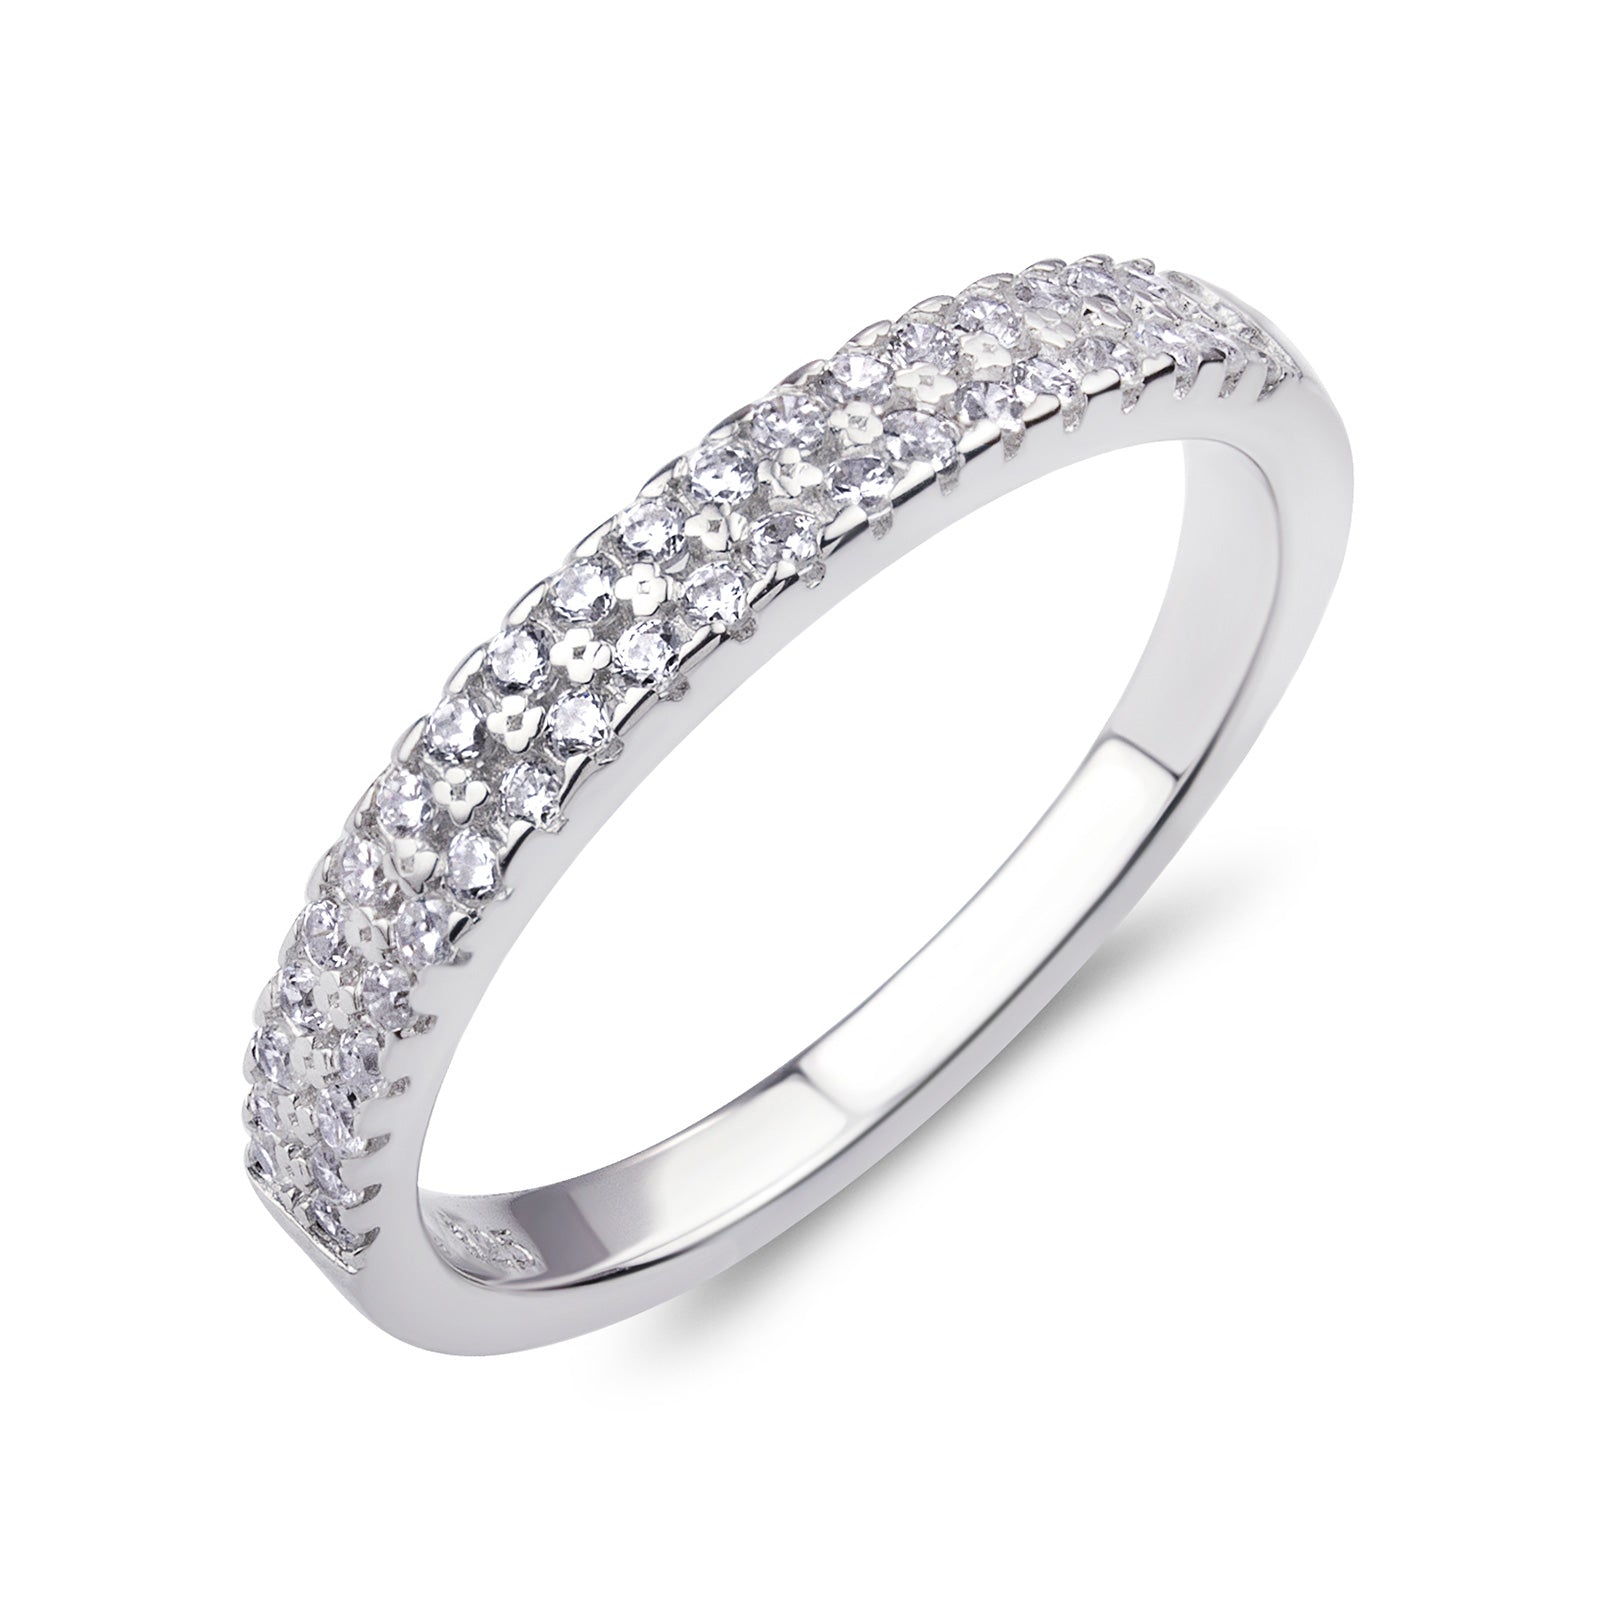 MD-SLR025 Silver Double Row Wedding Band